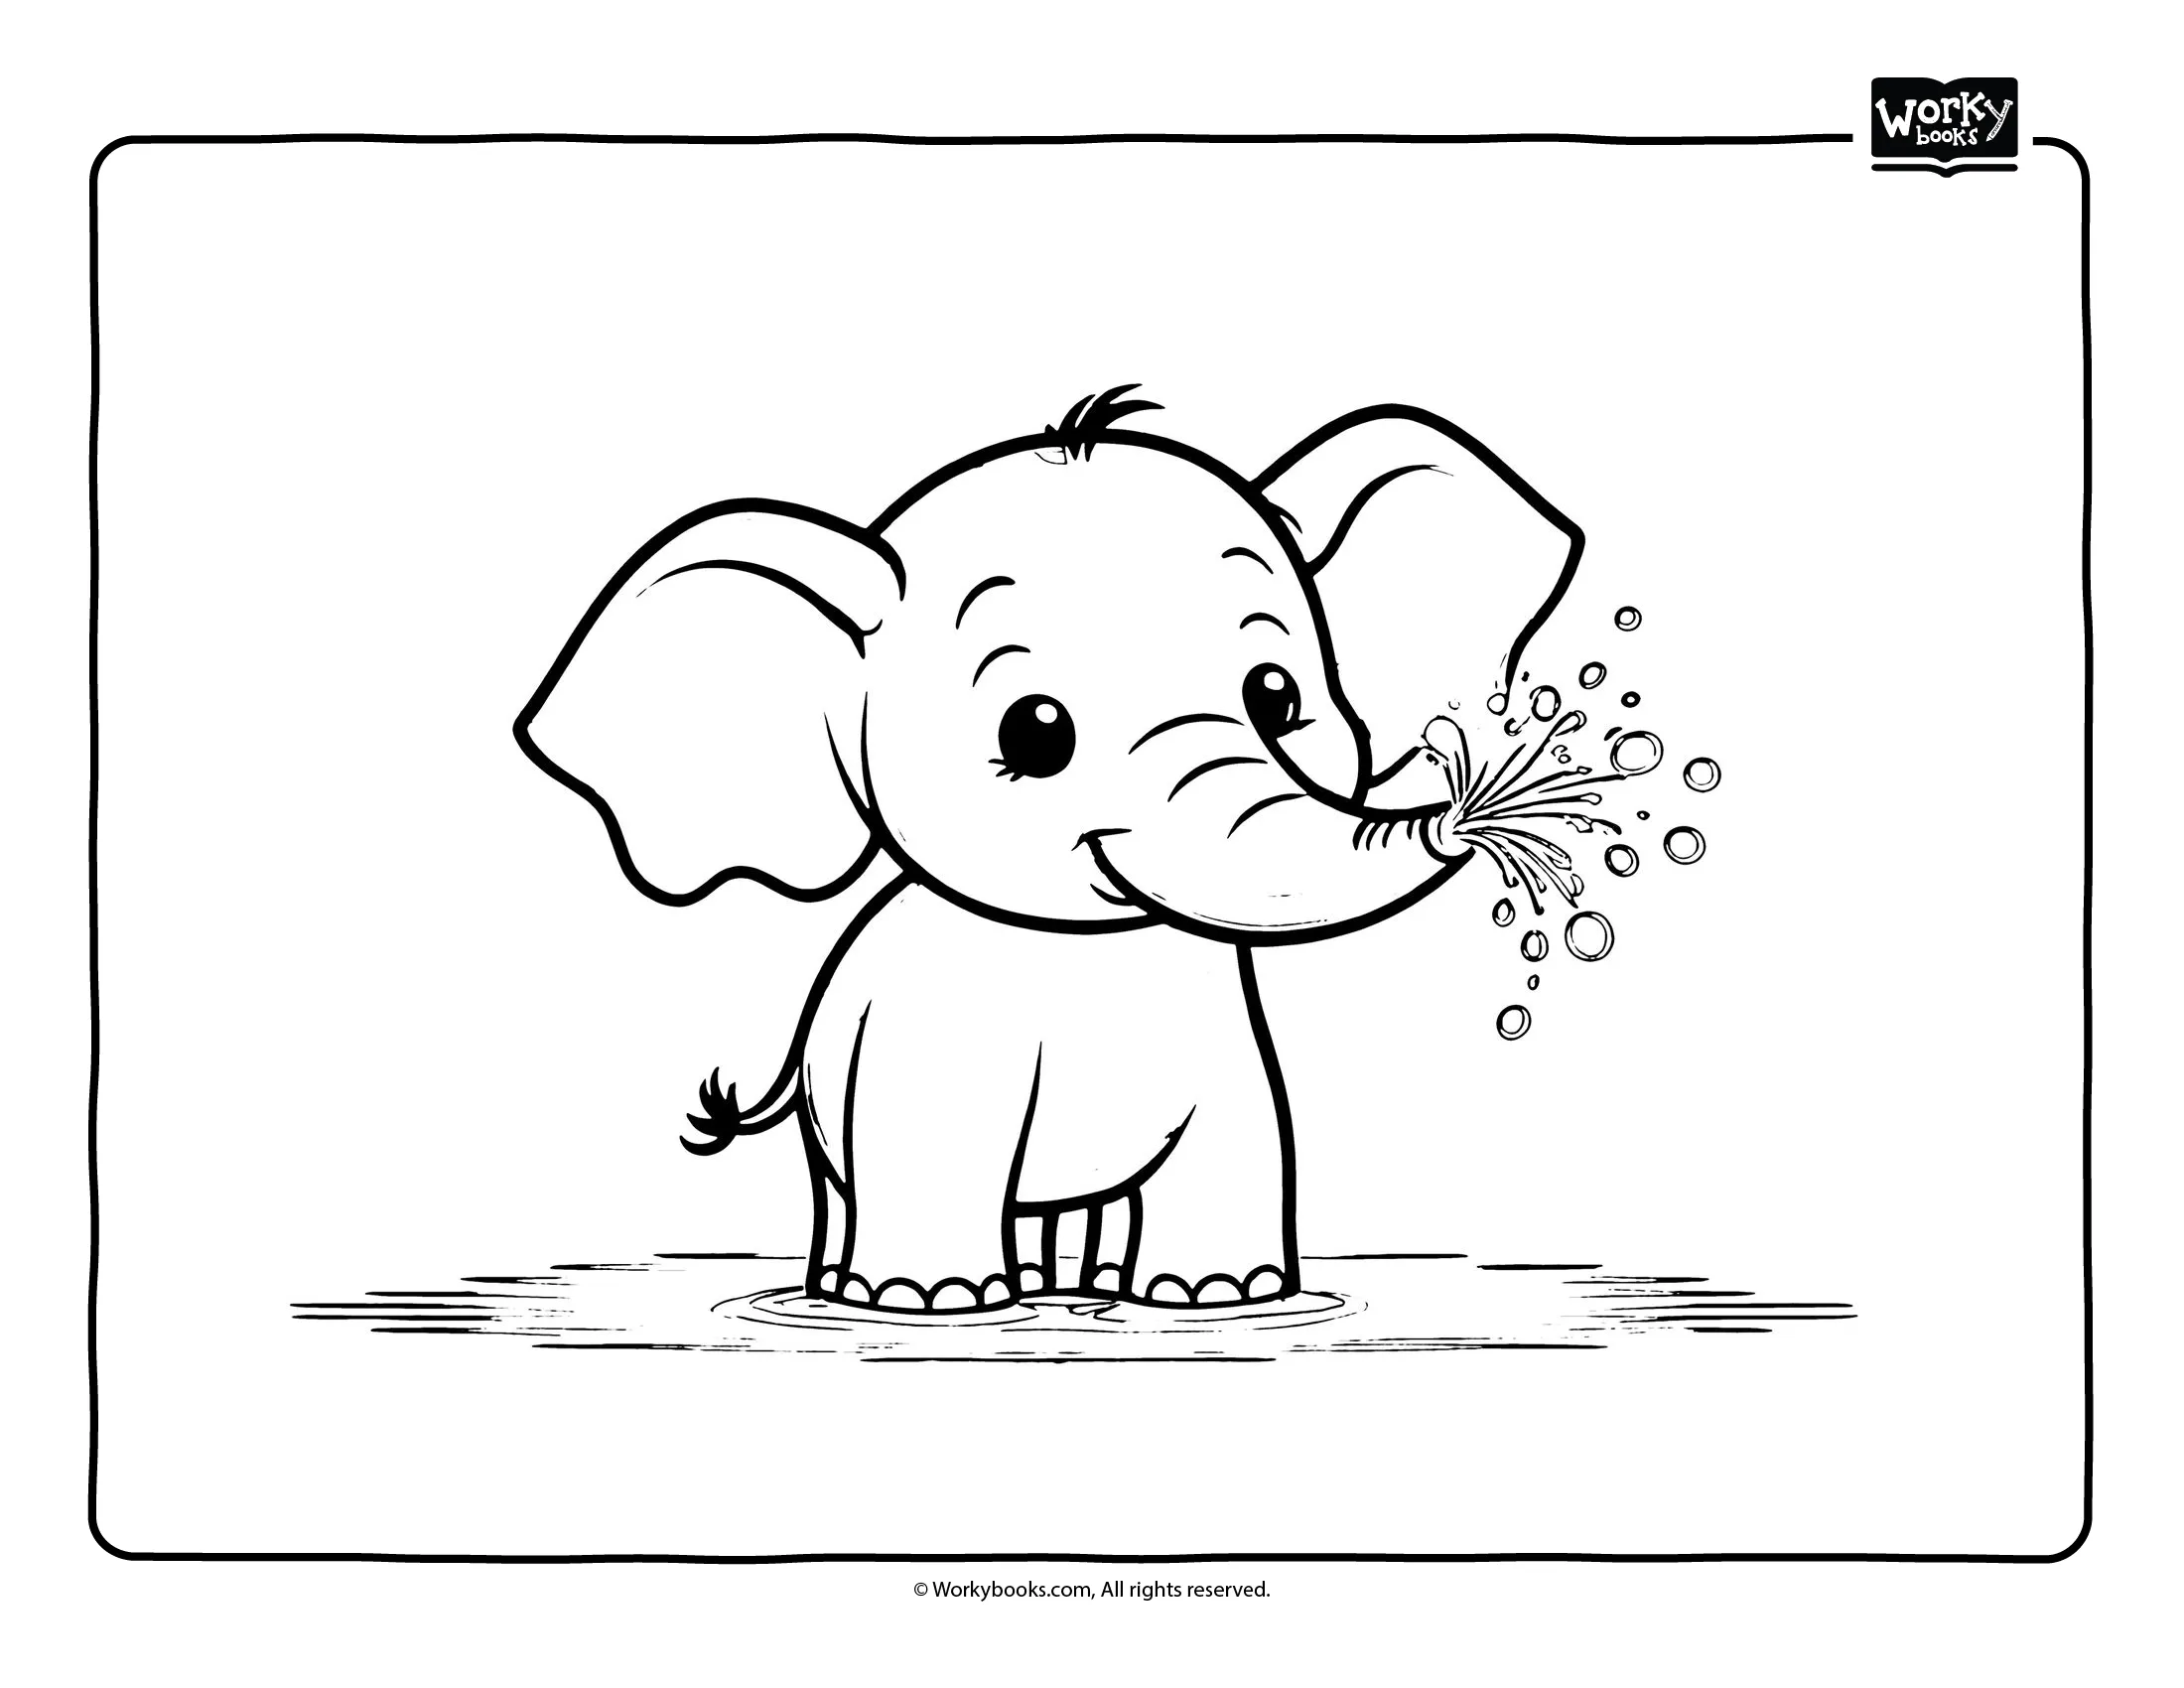 Elephant Spraying Water Playfully coloring page
